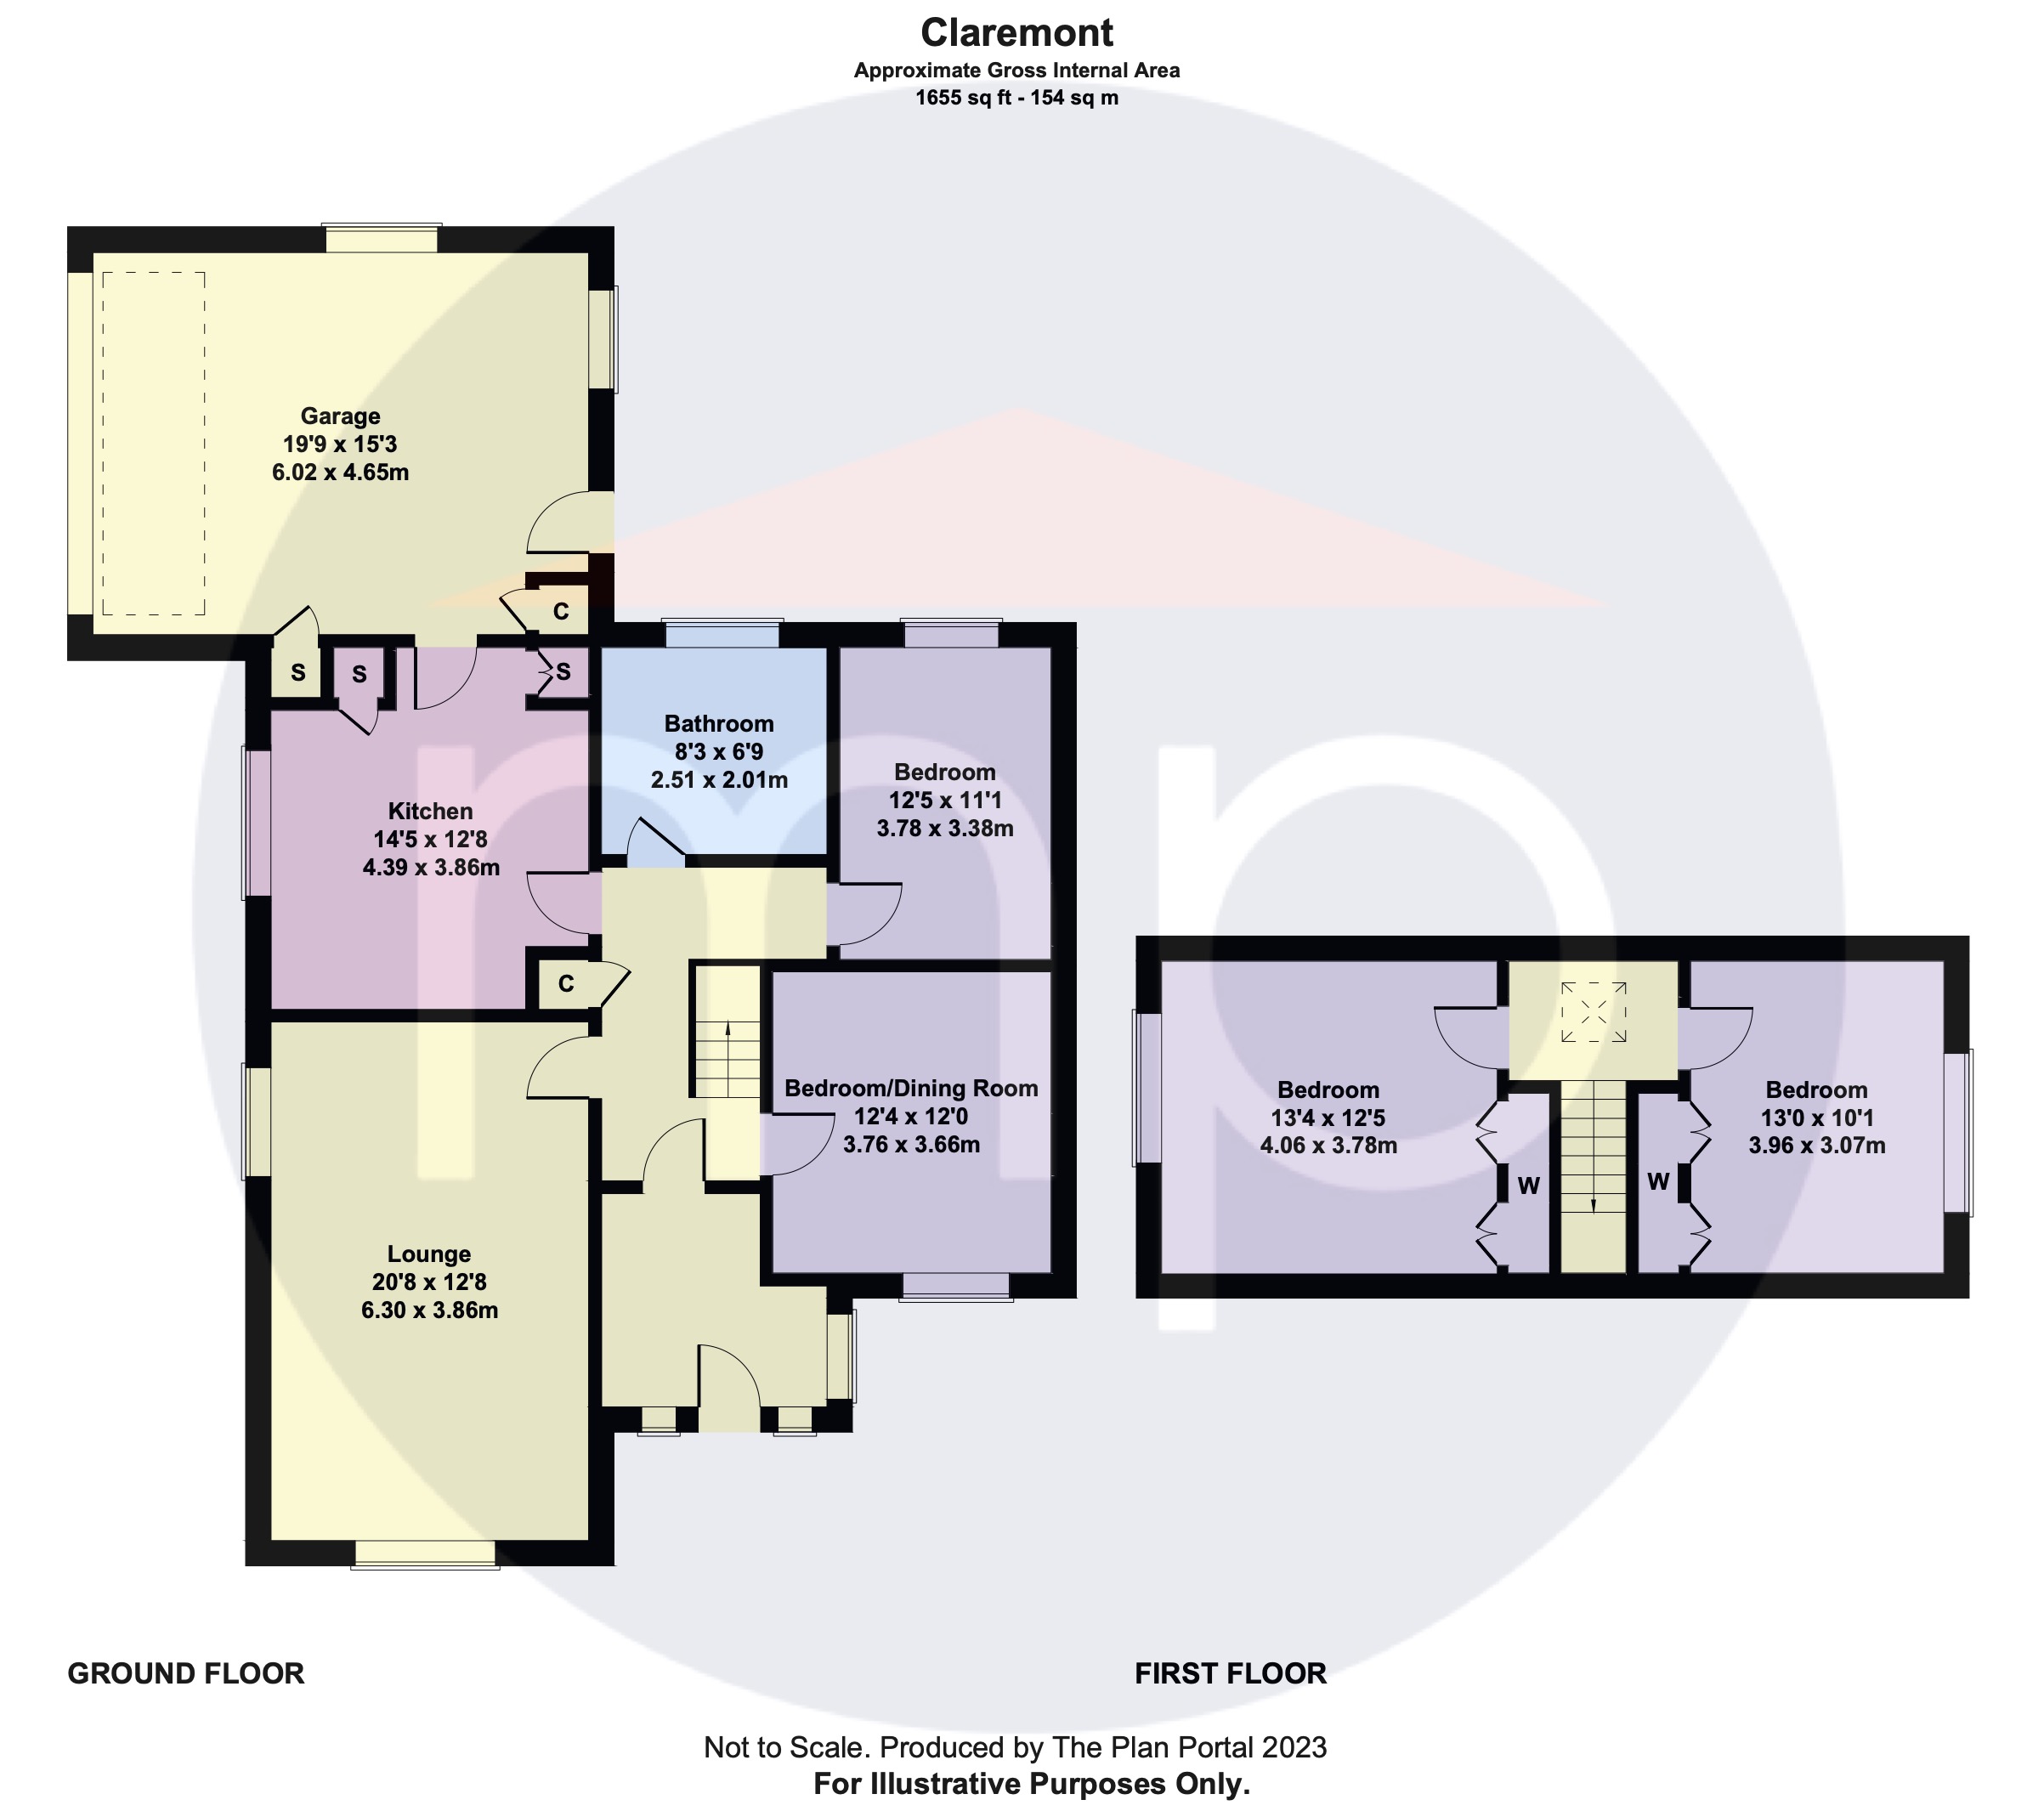 3 bed bungalow for sale - Property floorplan